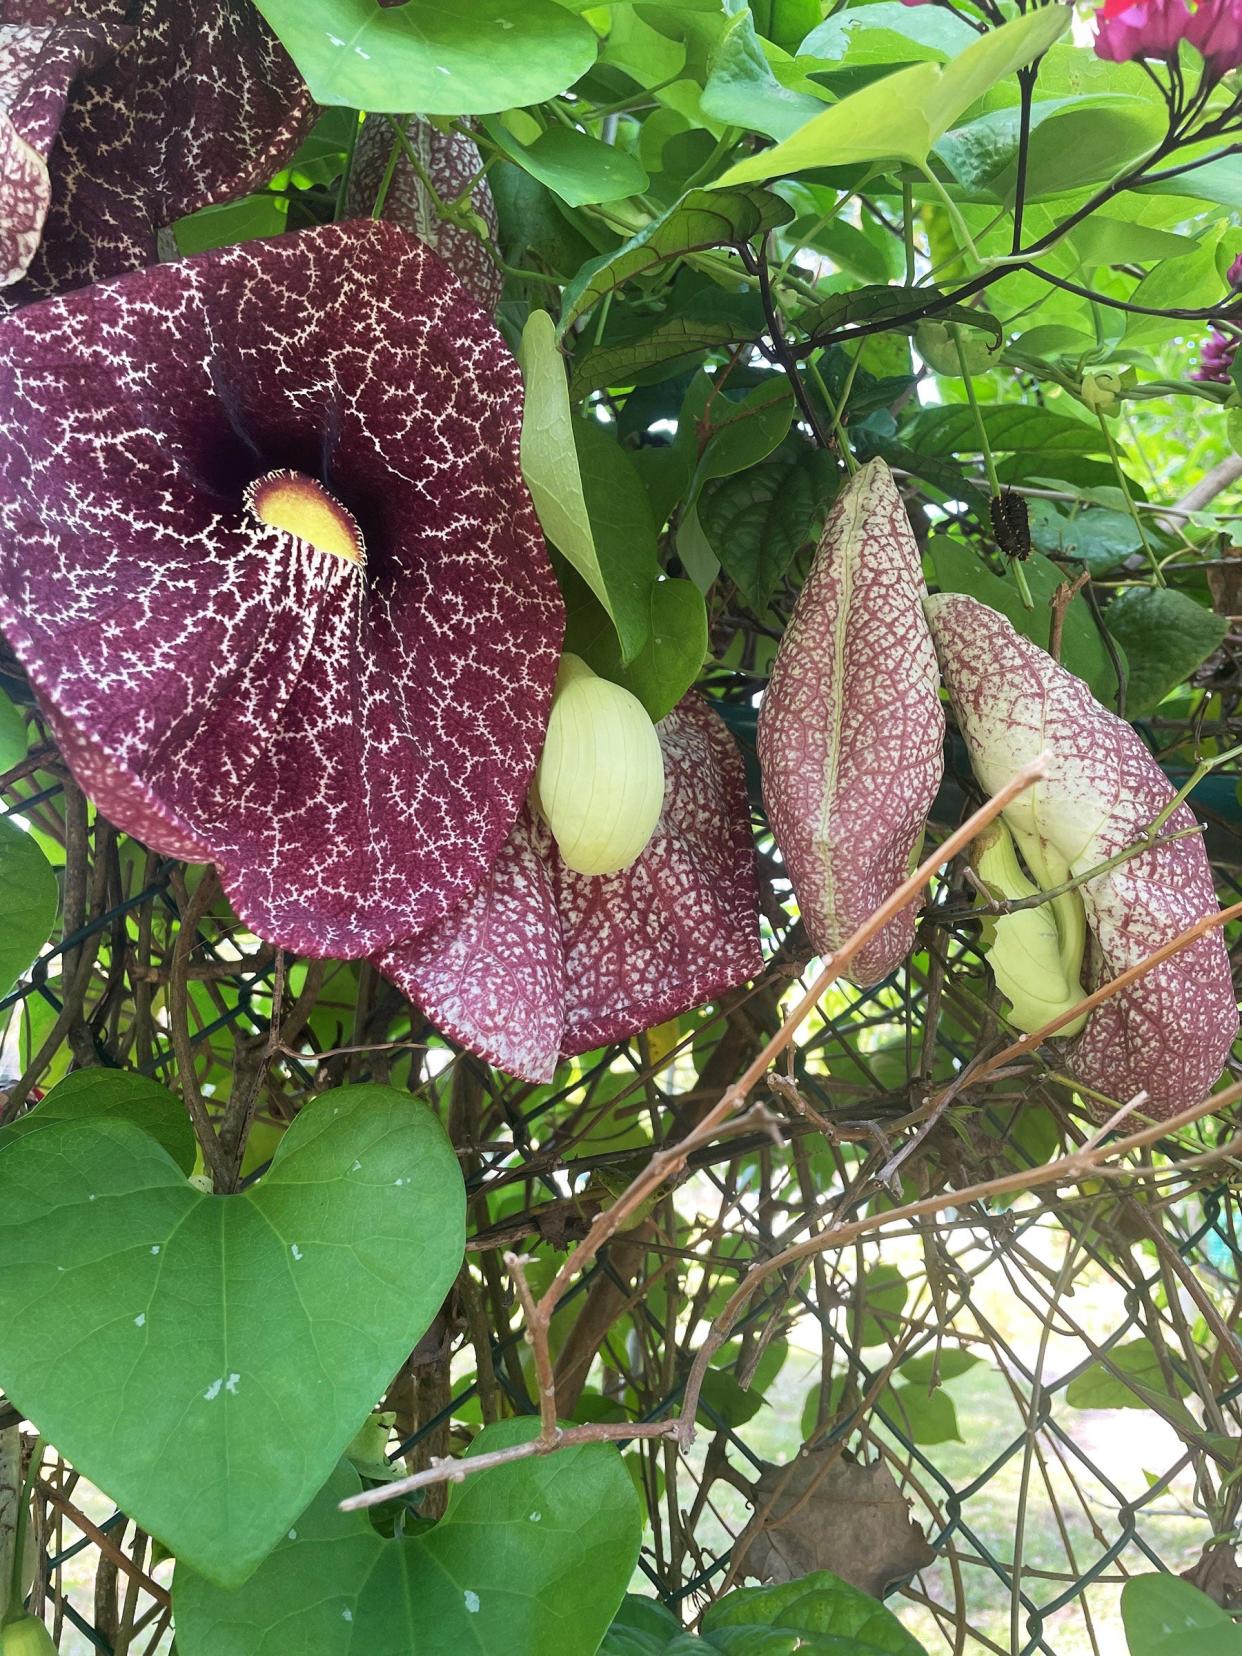 Take care when choosing a vine for your garden, as quite a few have been listed as invasive species. Dutchman’s pipe (Aristolochia littoralis), above, may catch your eye, but are now on the category II invasive species list (FISC).